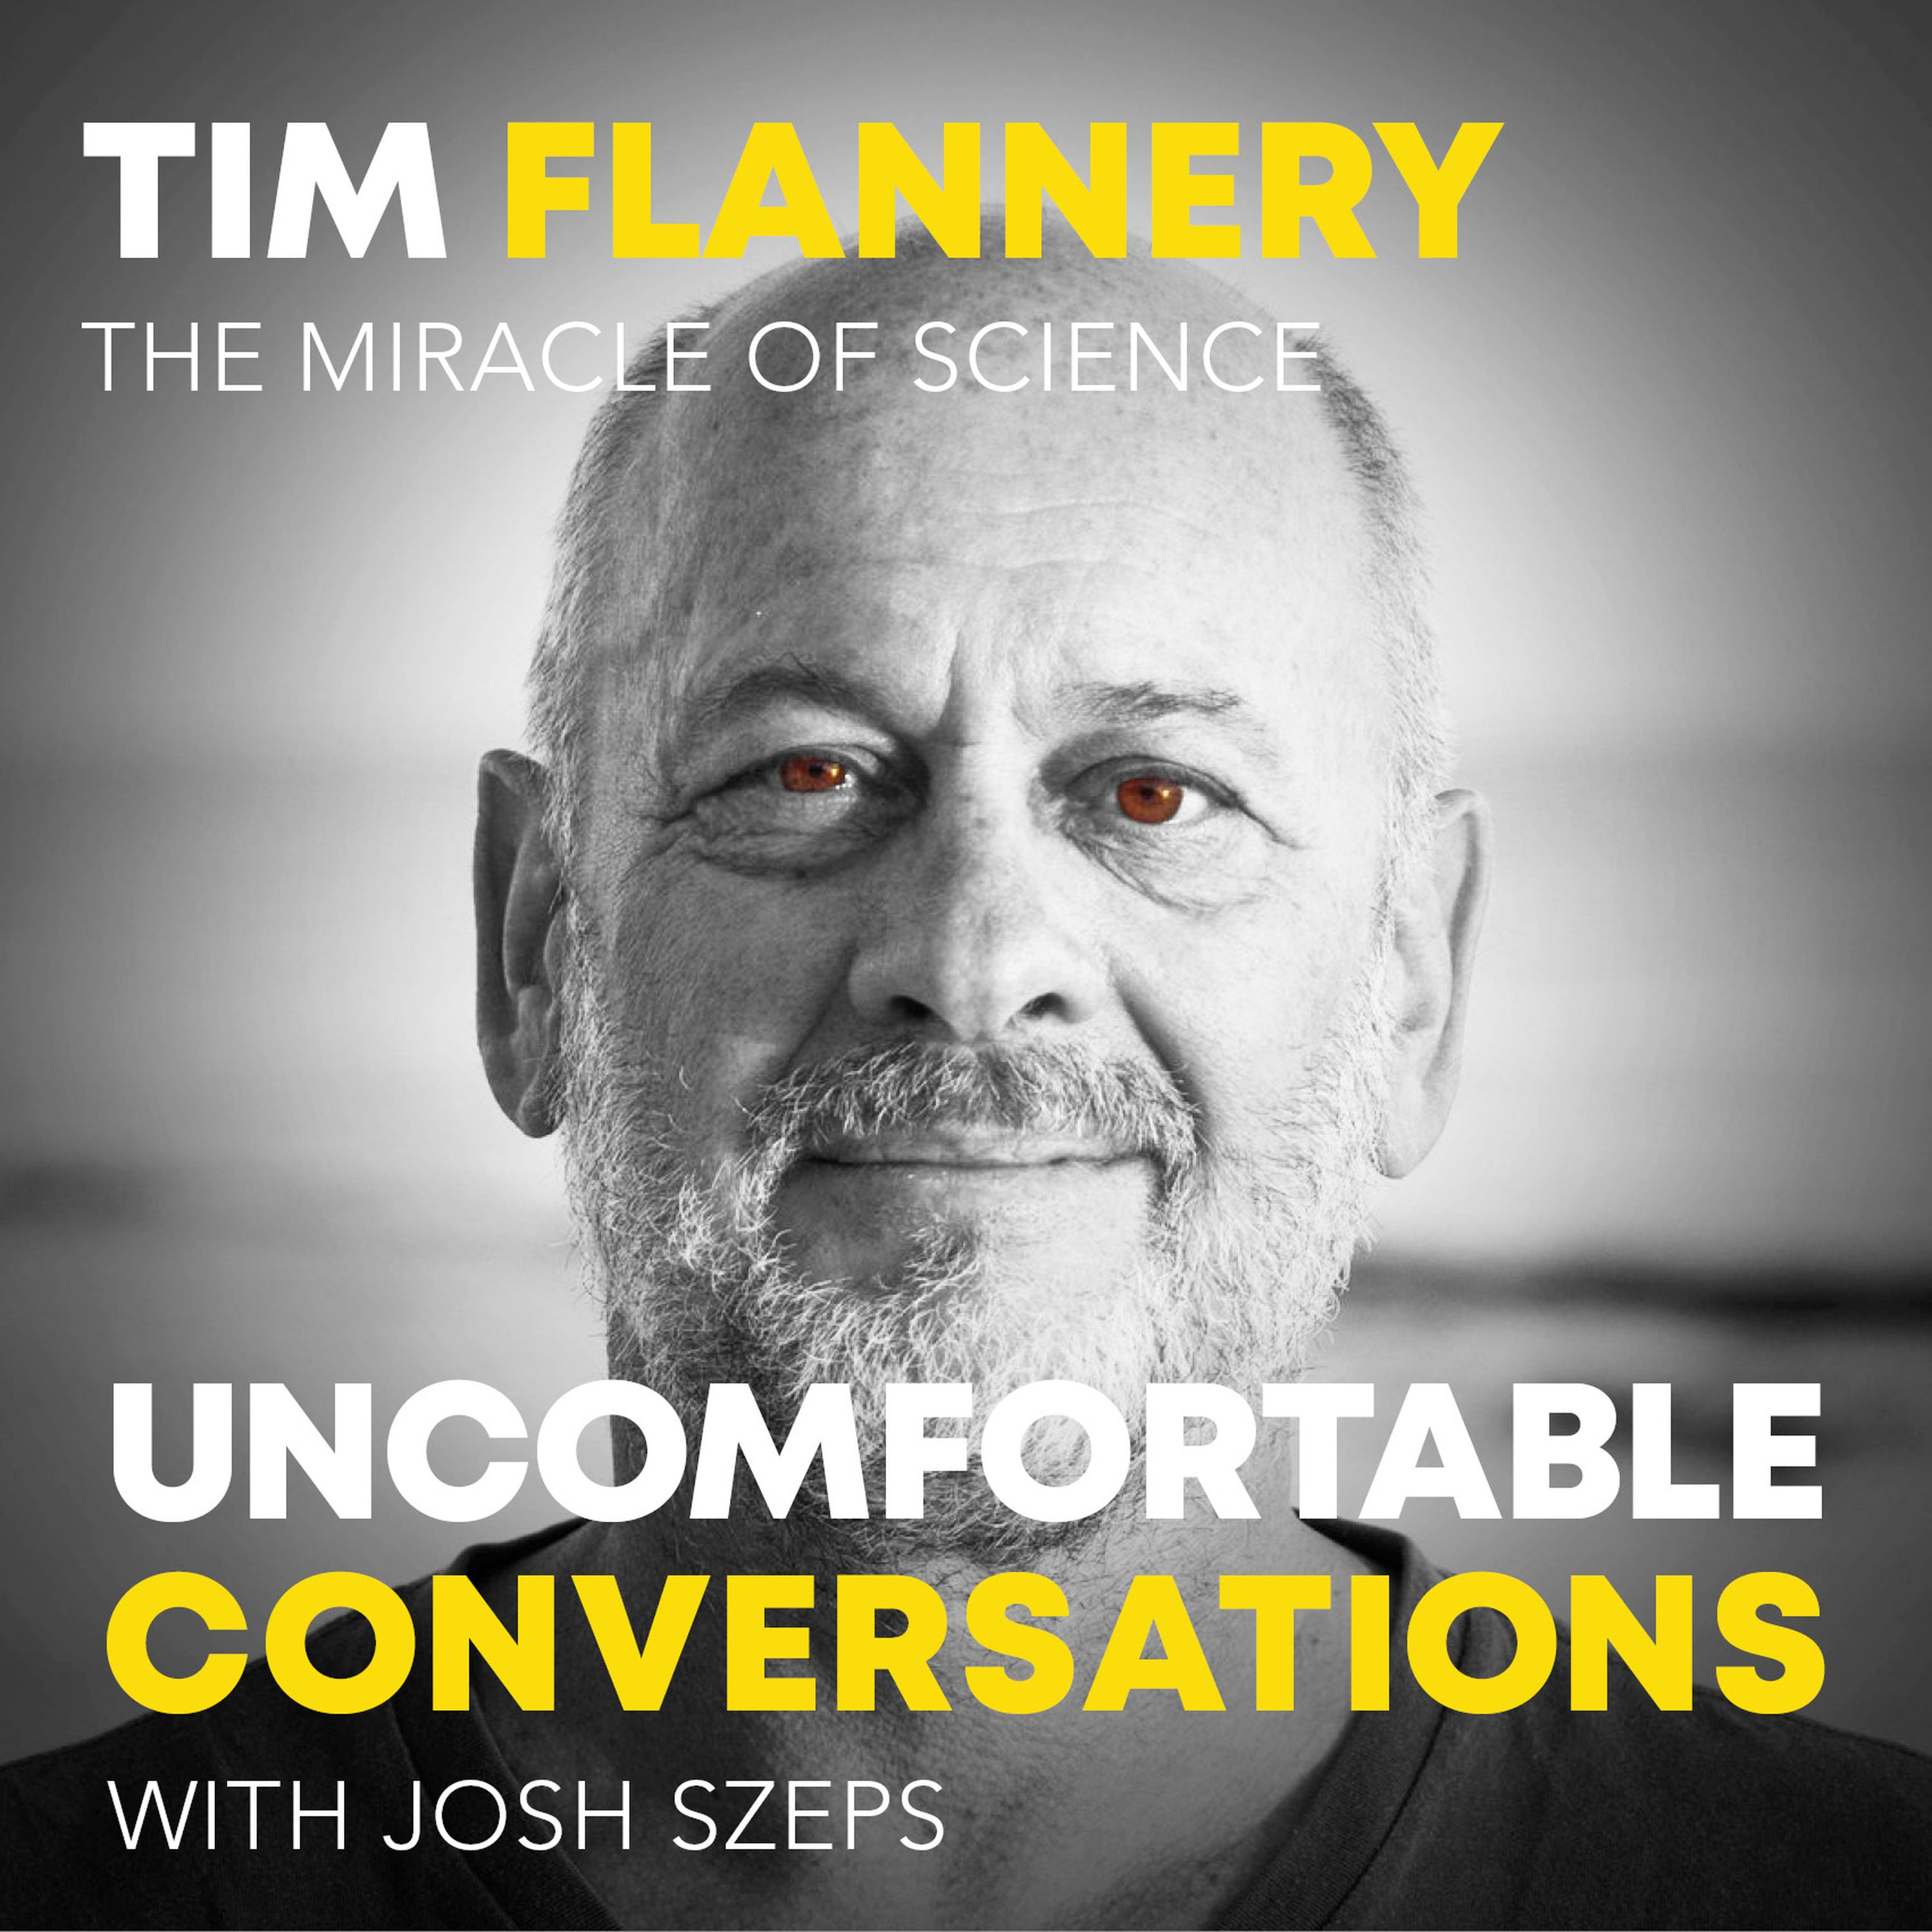 "The Miracle of Science" with Tim Flannery